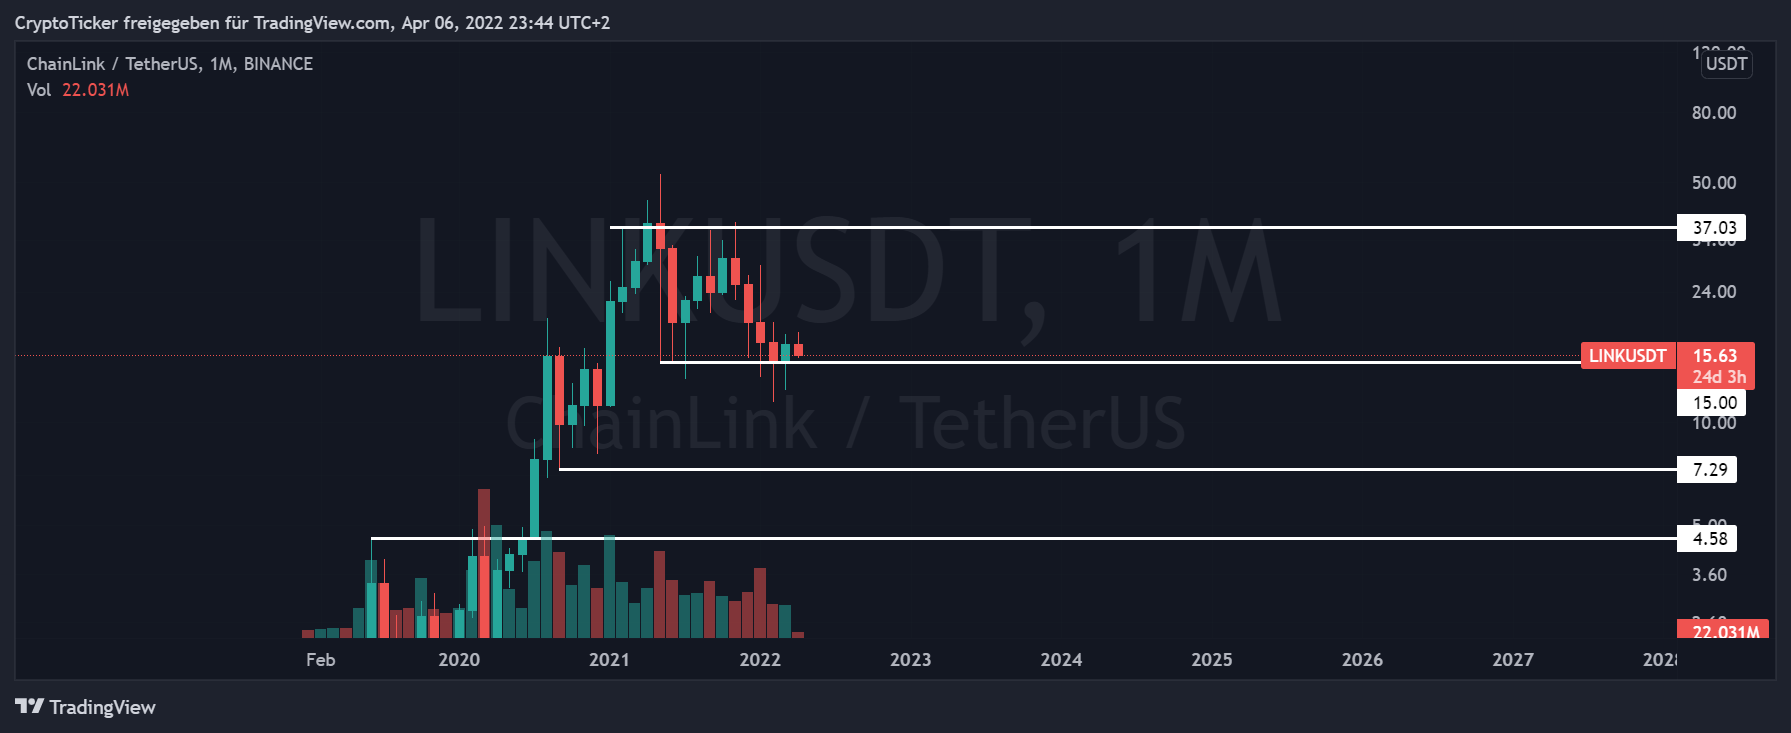 LINK/USDT 1-month chart showing LINK prices at the strong support